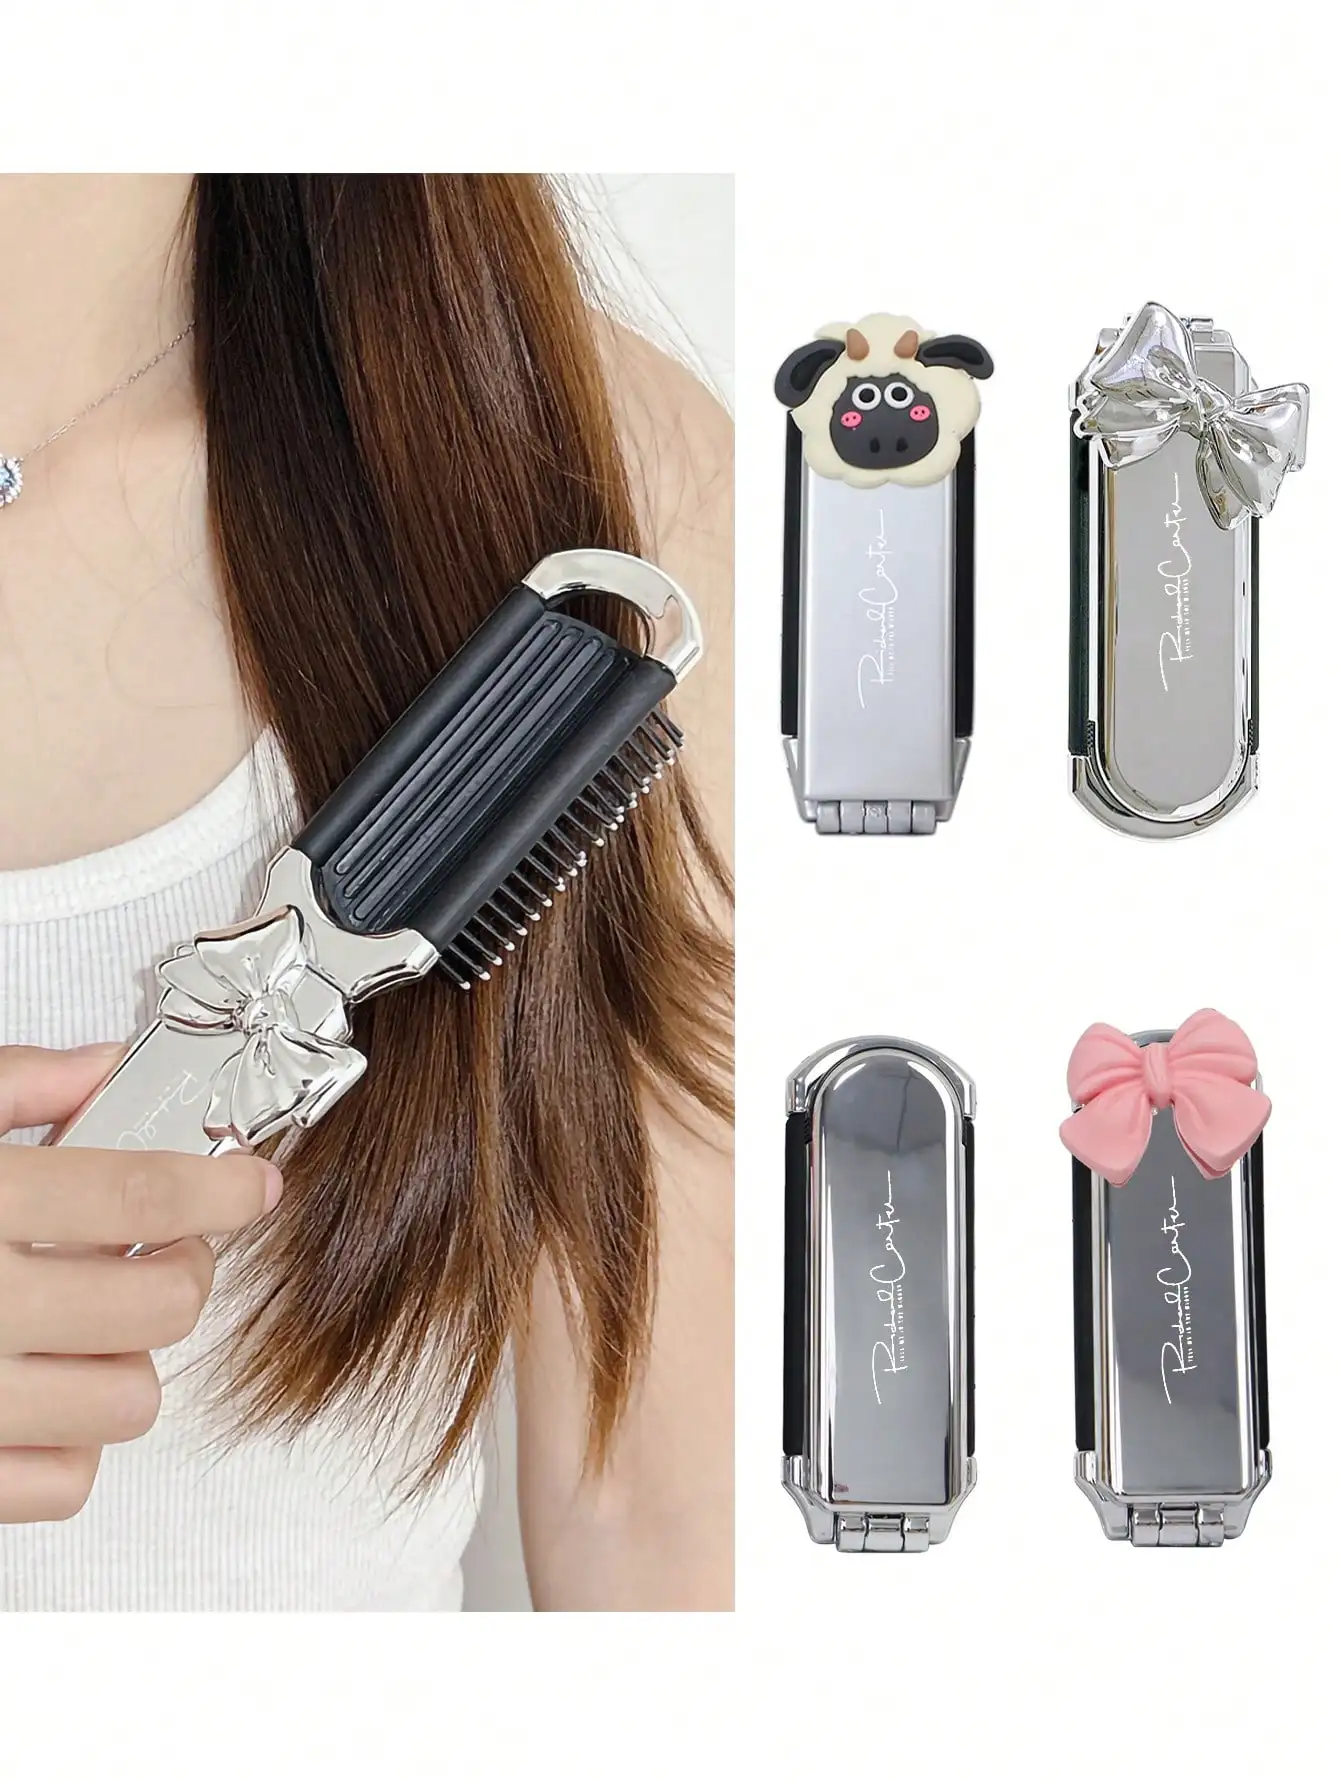 1pcs Folding Hairdressing Comb With Makeup Mirror, Portable Air Cushion Comb, Suitable For Daily Outgoing Travel Use fashion makeup bag portable women s travel outgoing large capacity new high quality storage wash bag cosmetic bag